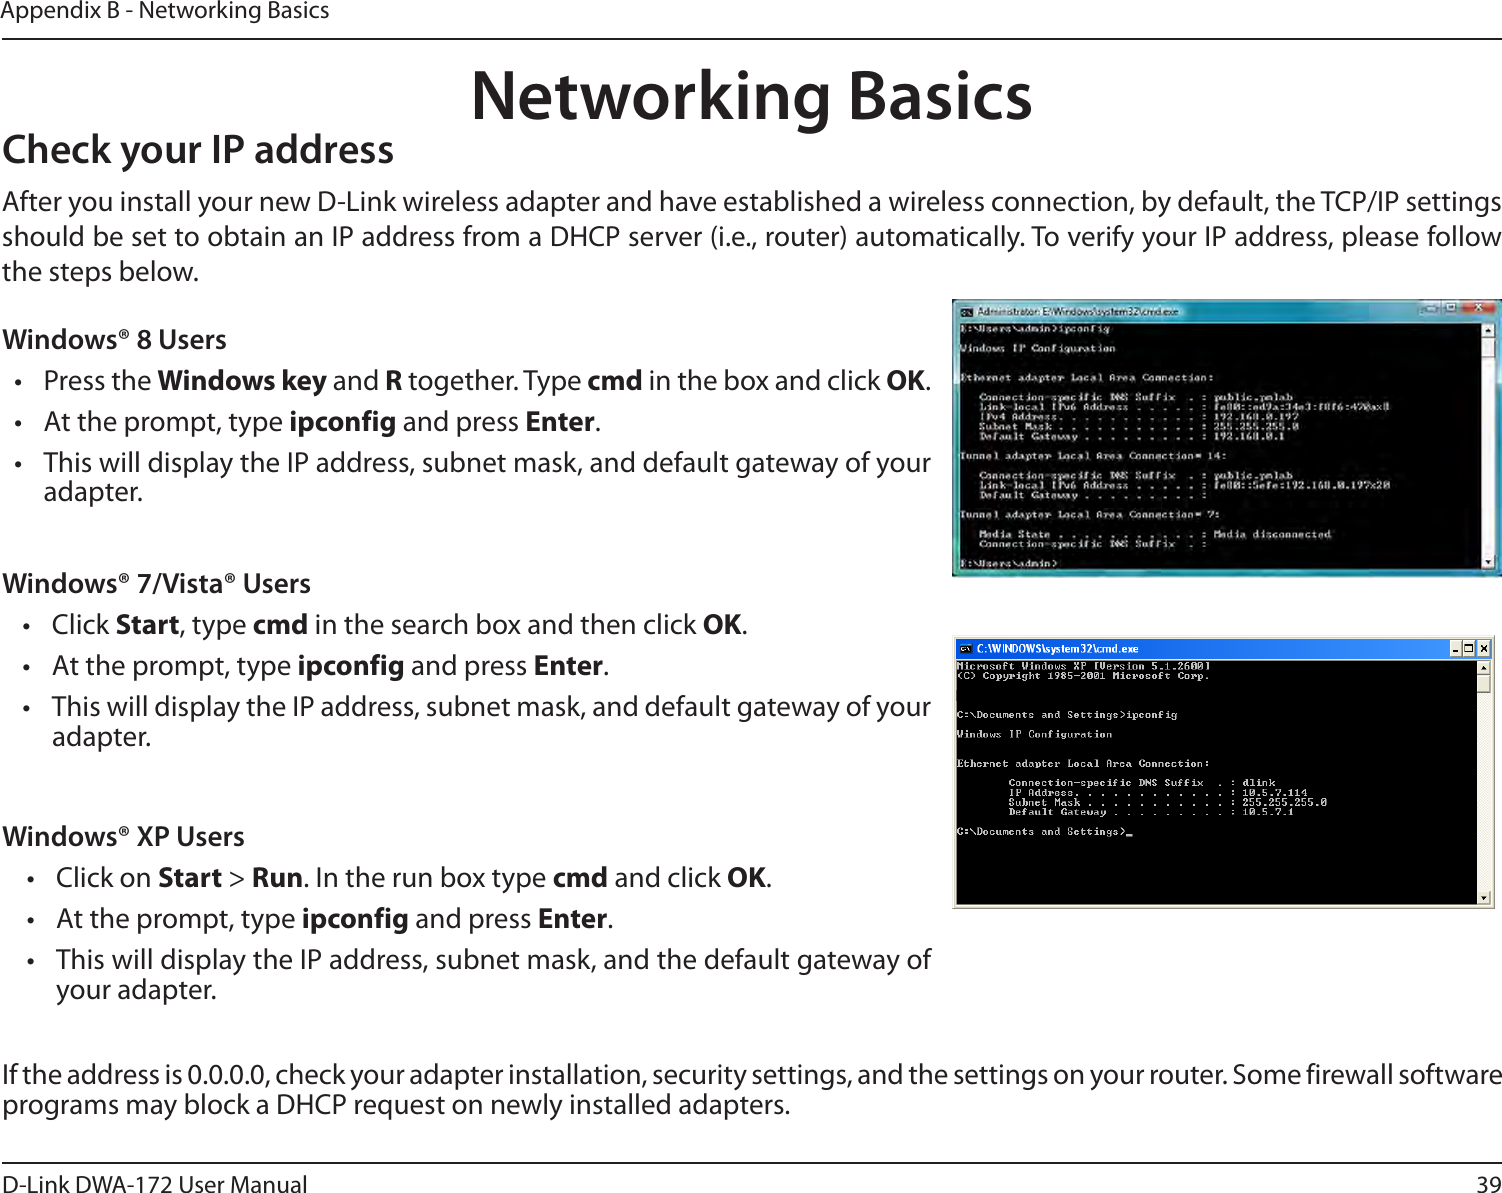 39D-Link DWA-172 User ManualAppendix B - Networking BasicsNetworking BasicsCheck your IP addressWindows® XP Users•  Click on Start &gt; Run. In the run box type cmd and click OK.•  At the prompt, type ipconfig and press Enter.•  This will display the IP address, subnet mask, and the default gateway of your adapter.Windows® 7/Vista® Users• Click Start, type cmd in the search box and then click OK.•  At the prompt, type ipconfig and press Enter.•  This will display the IP address, subnet mask, and default gateway of your adapter.If the address is 0.0.0.0, check your adapter installation, security settings, and the settings on your router. Some firewall software programs may block a DHCP request on newly installed adapters.Windows® 8 Users•  Press the Windows key and R together. Type cmd in the box and click OK.•  At the prompt, type ipconfig and press Enter.•  This will display the IP address, subnet mask, and default gateway of your adapter.After you install your new D-Link wireless adapter and have established a wireless connection, by default, the TCP/IP settings should be set to obtain an IP address from a DHCP server (i.e., router) automatically. To verify your IP address, please follow the steps below.